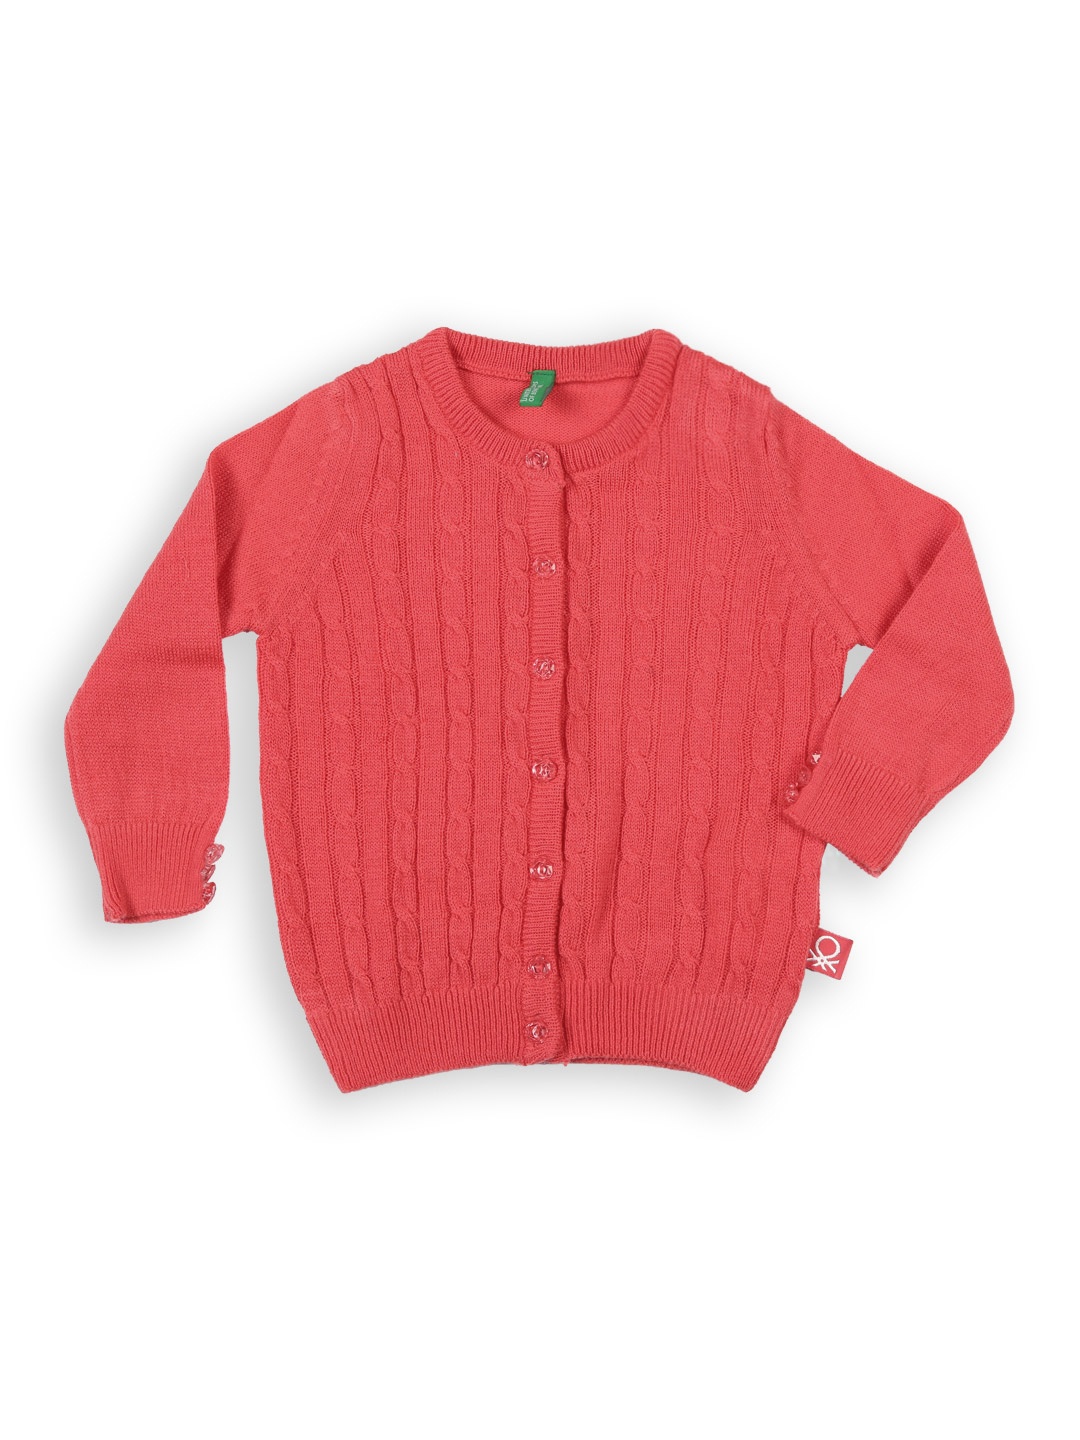  Clothing Girls Clothing Sweaters United Colors of Benetton Sweaters